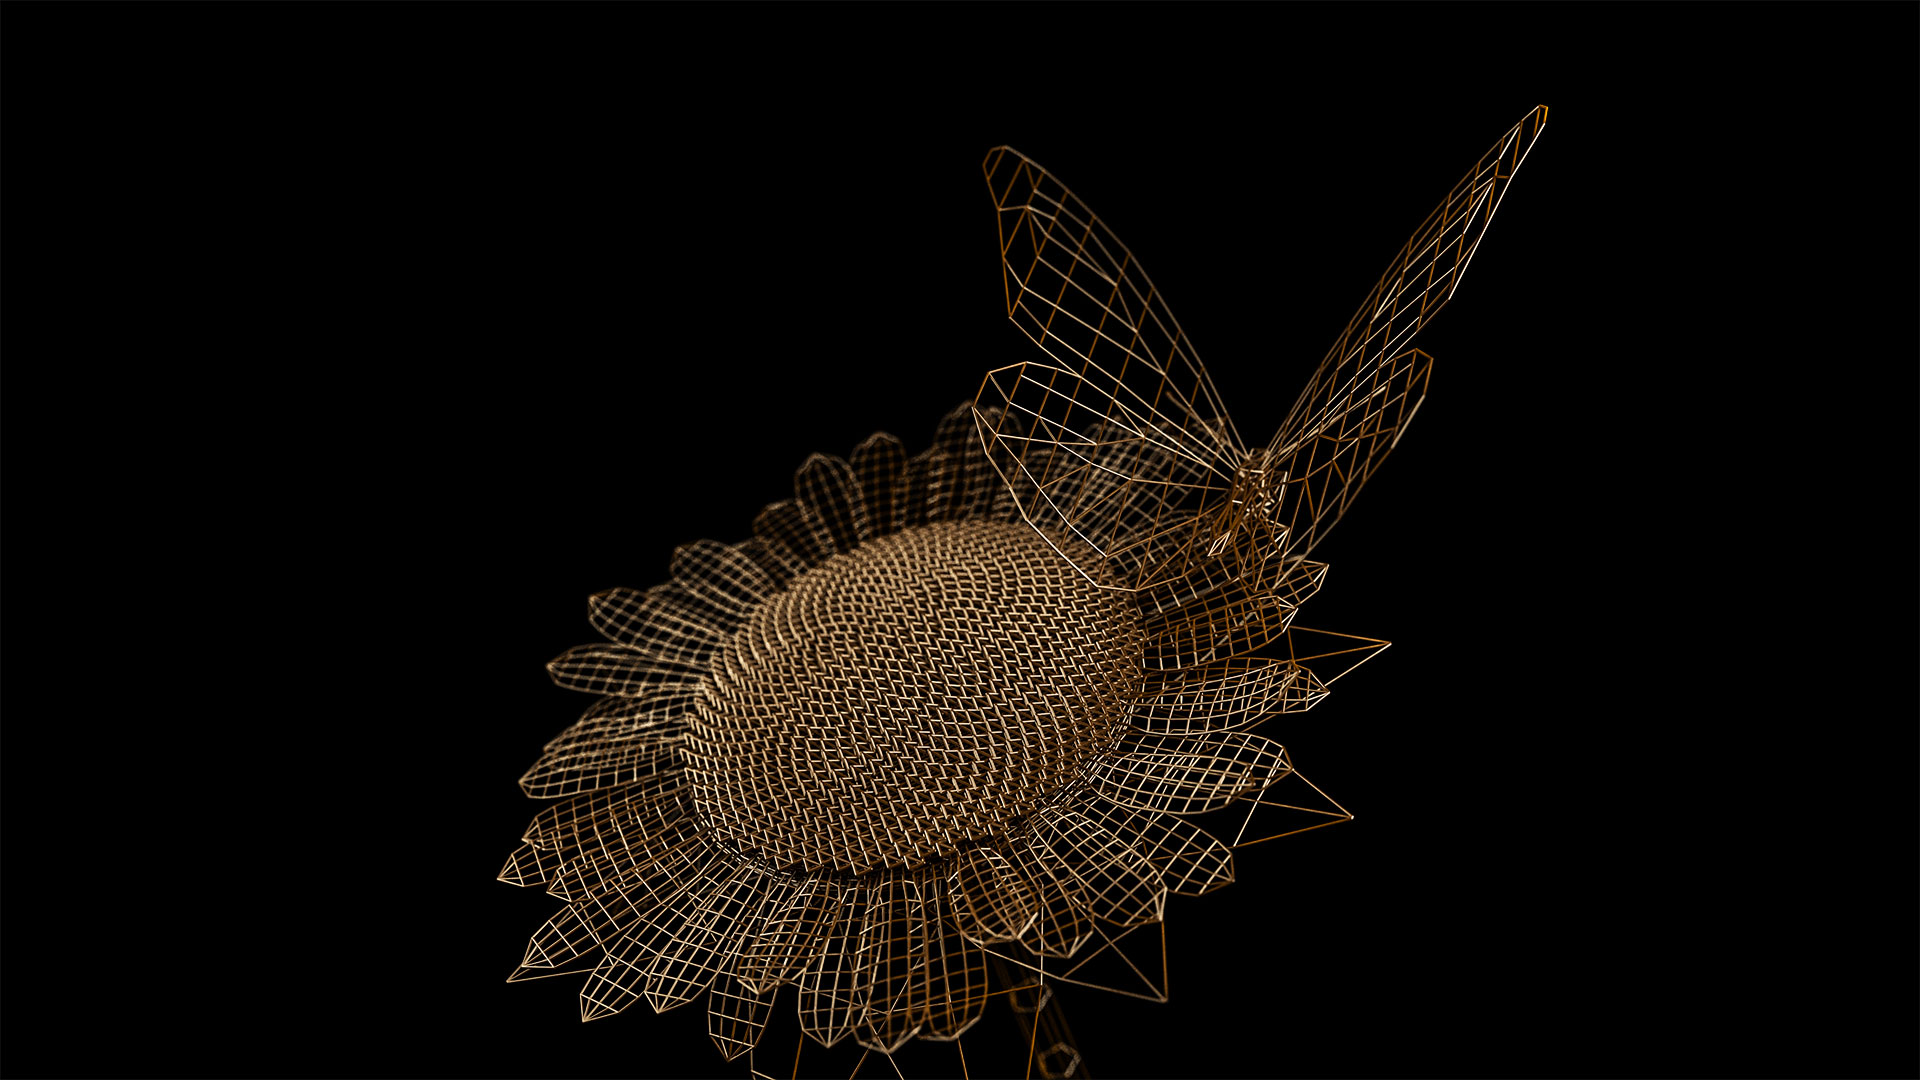 Cinema 4D Artist Adam Wilkes created a 3D golden sunflower and butterfly wireframe for Style frames project